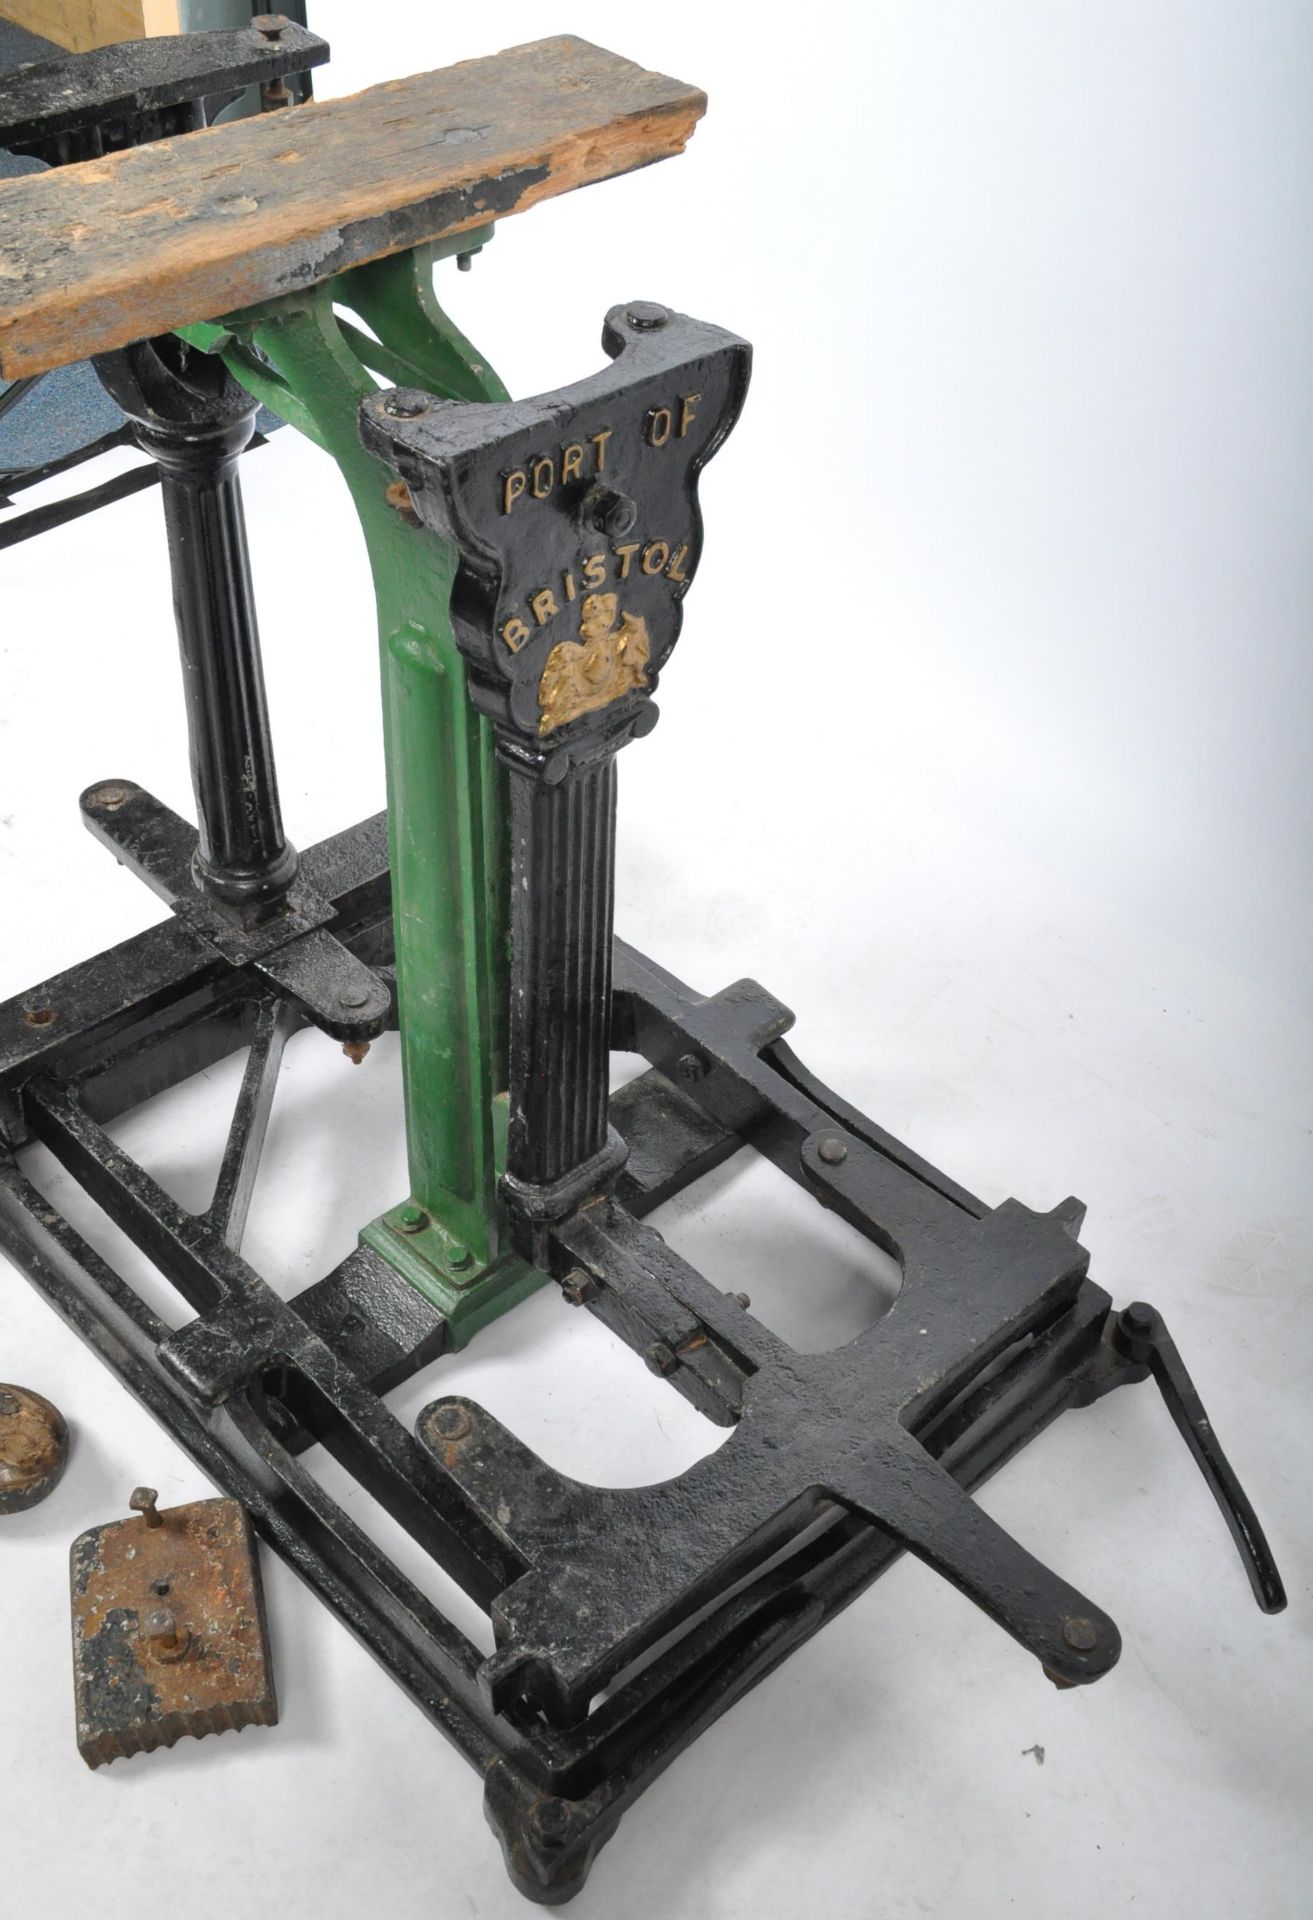 BRISTOL PORT HEAVY CAST IRON CUSTOMS & EXCISE WEIGHING SCALES - Image 4 of 6